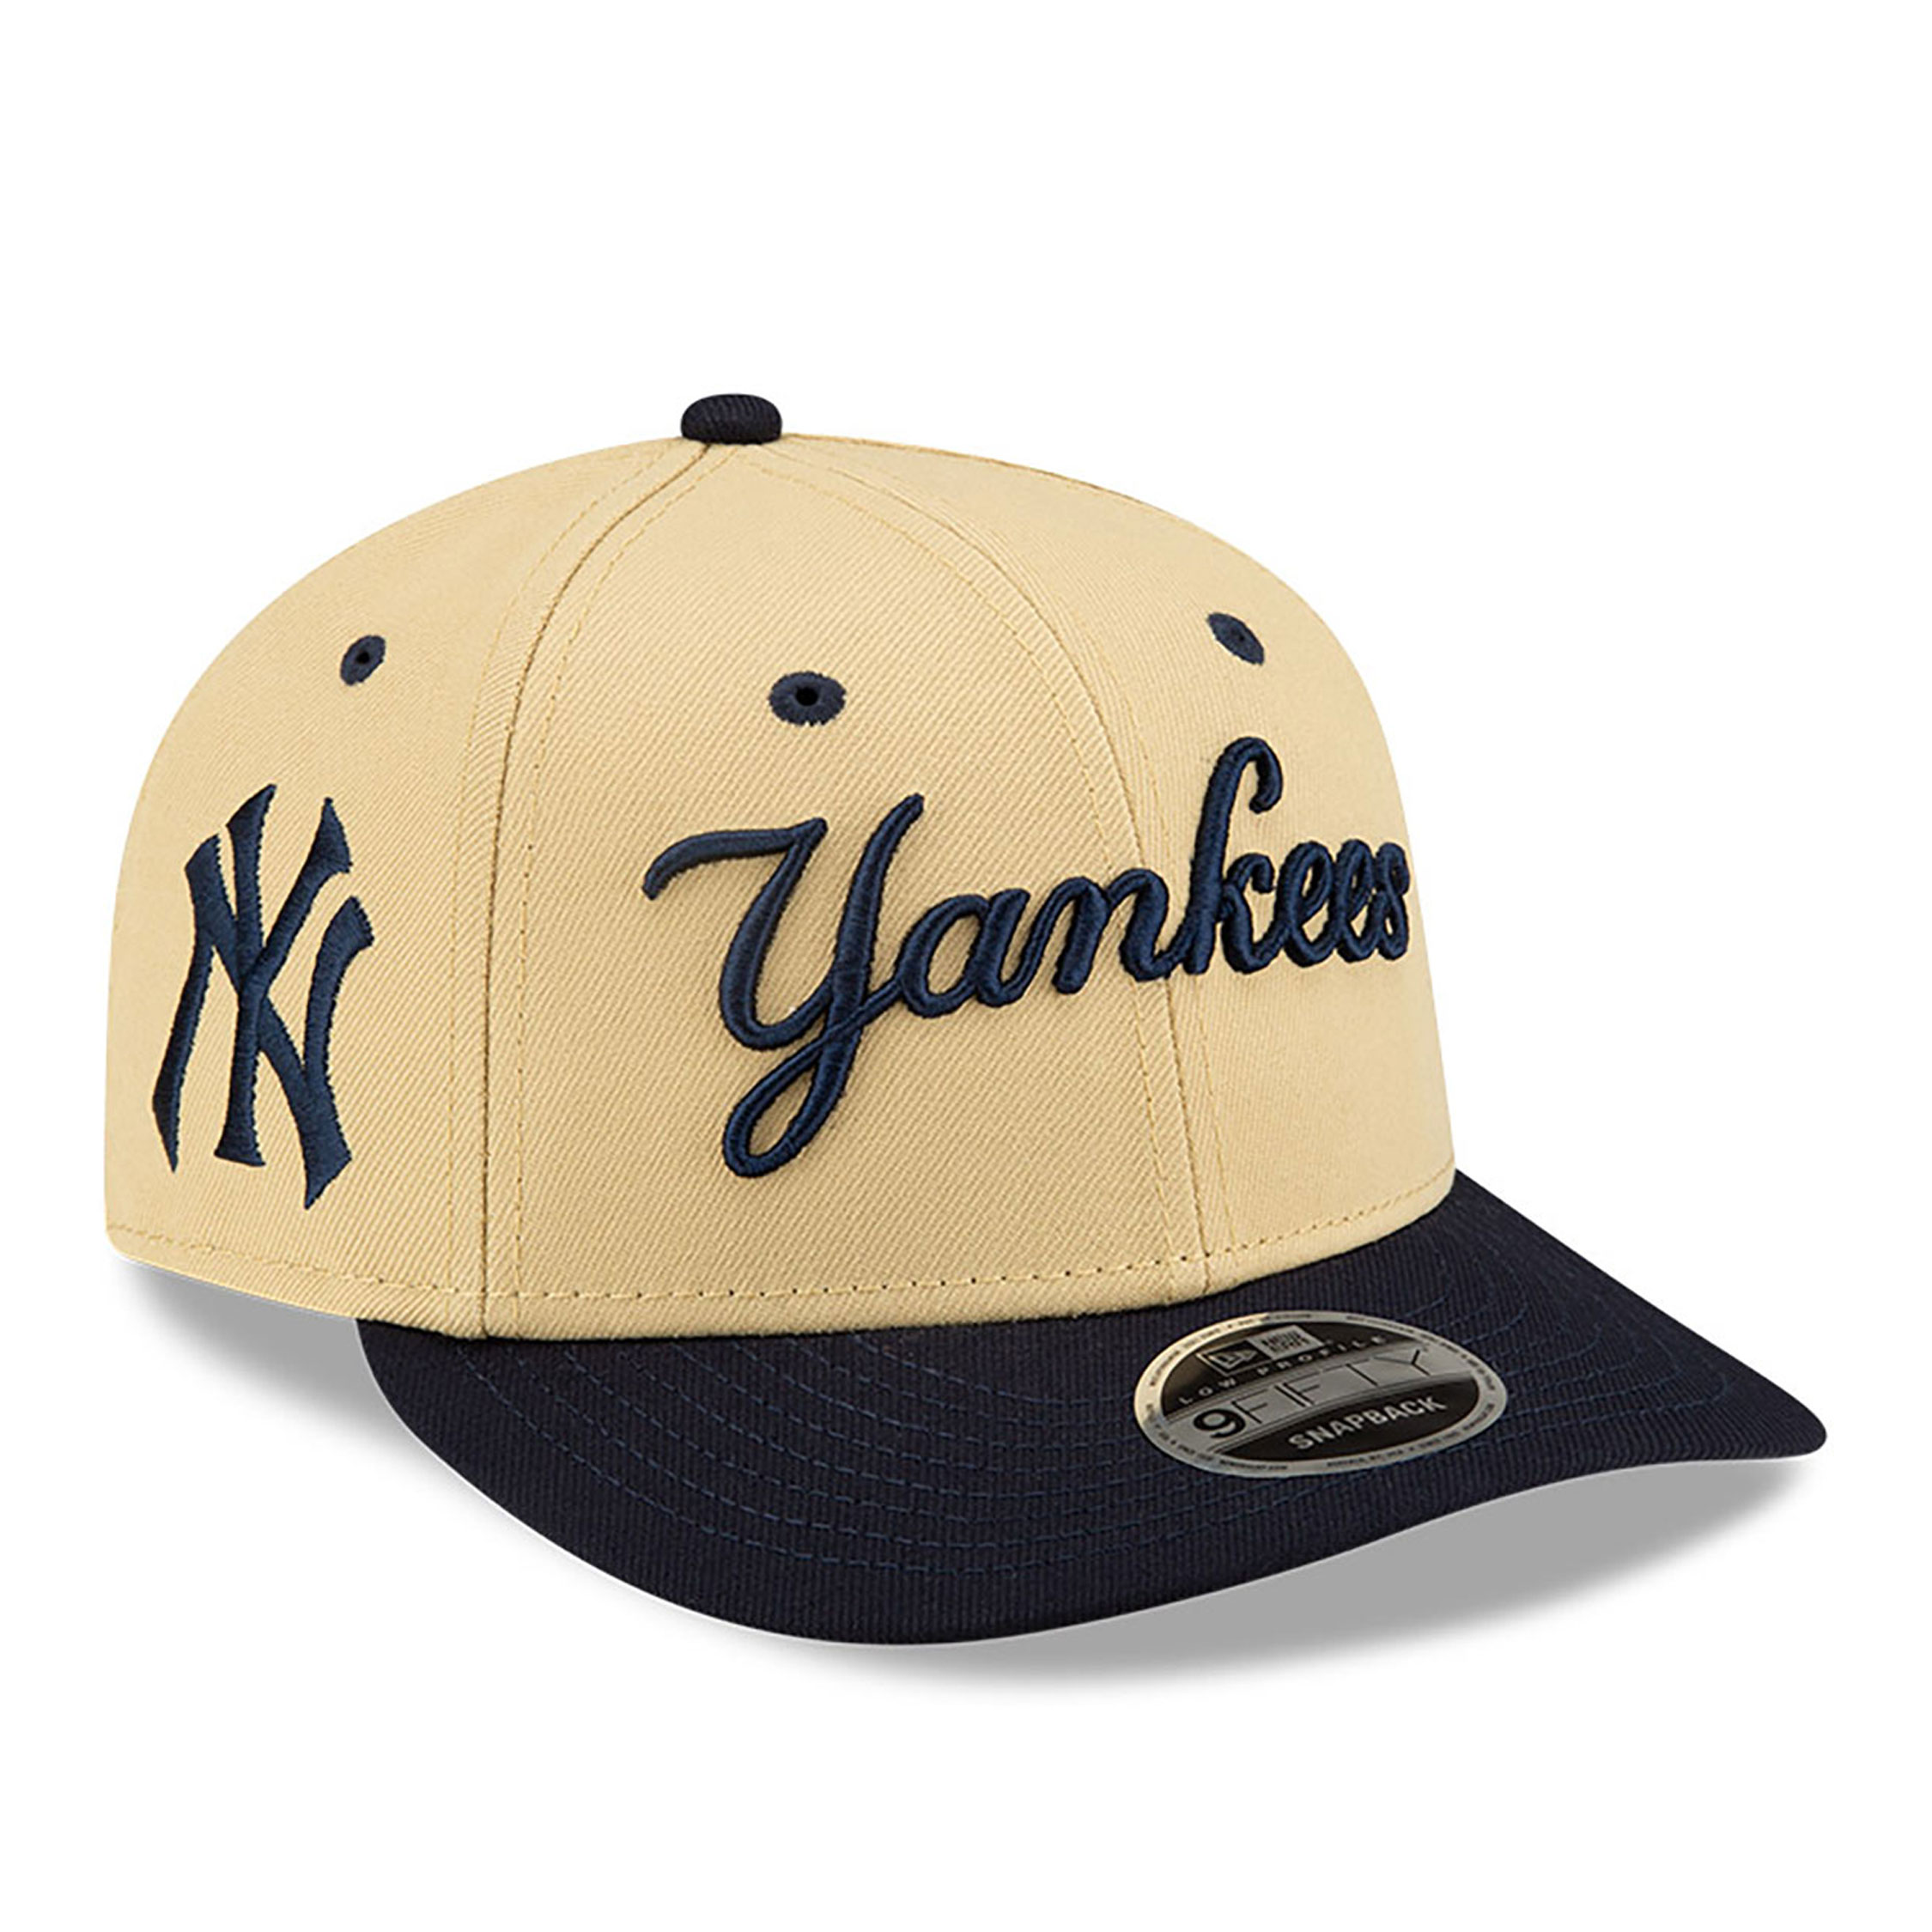 Casquette New Era New York Yankees Golfer Tee 9FIFTY Snapback blanche pour  homme